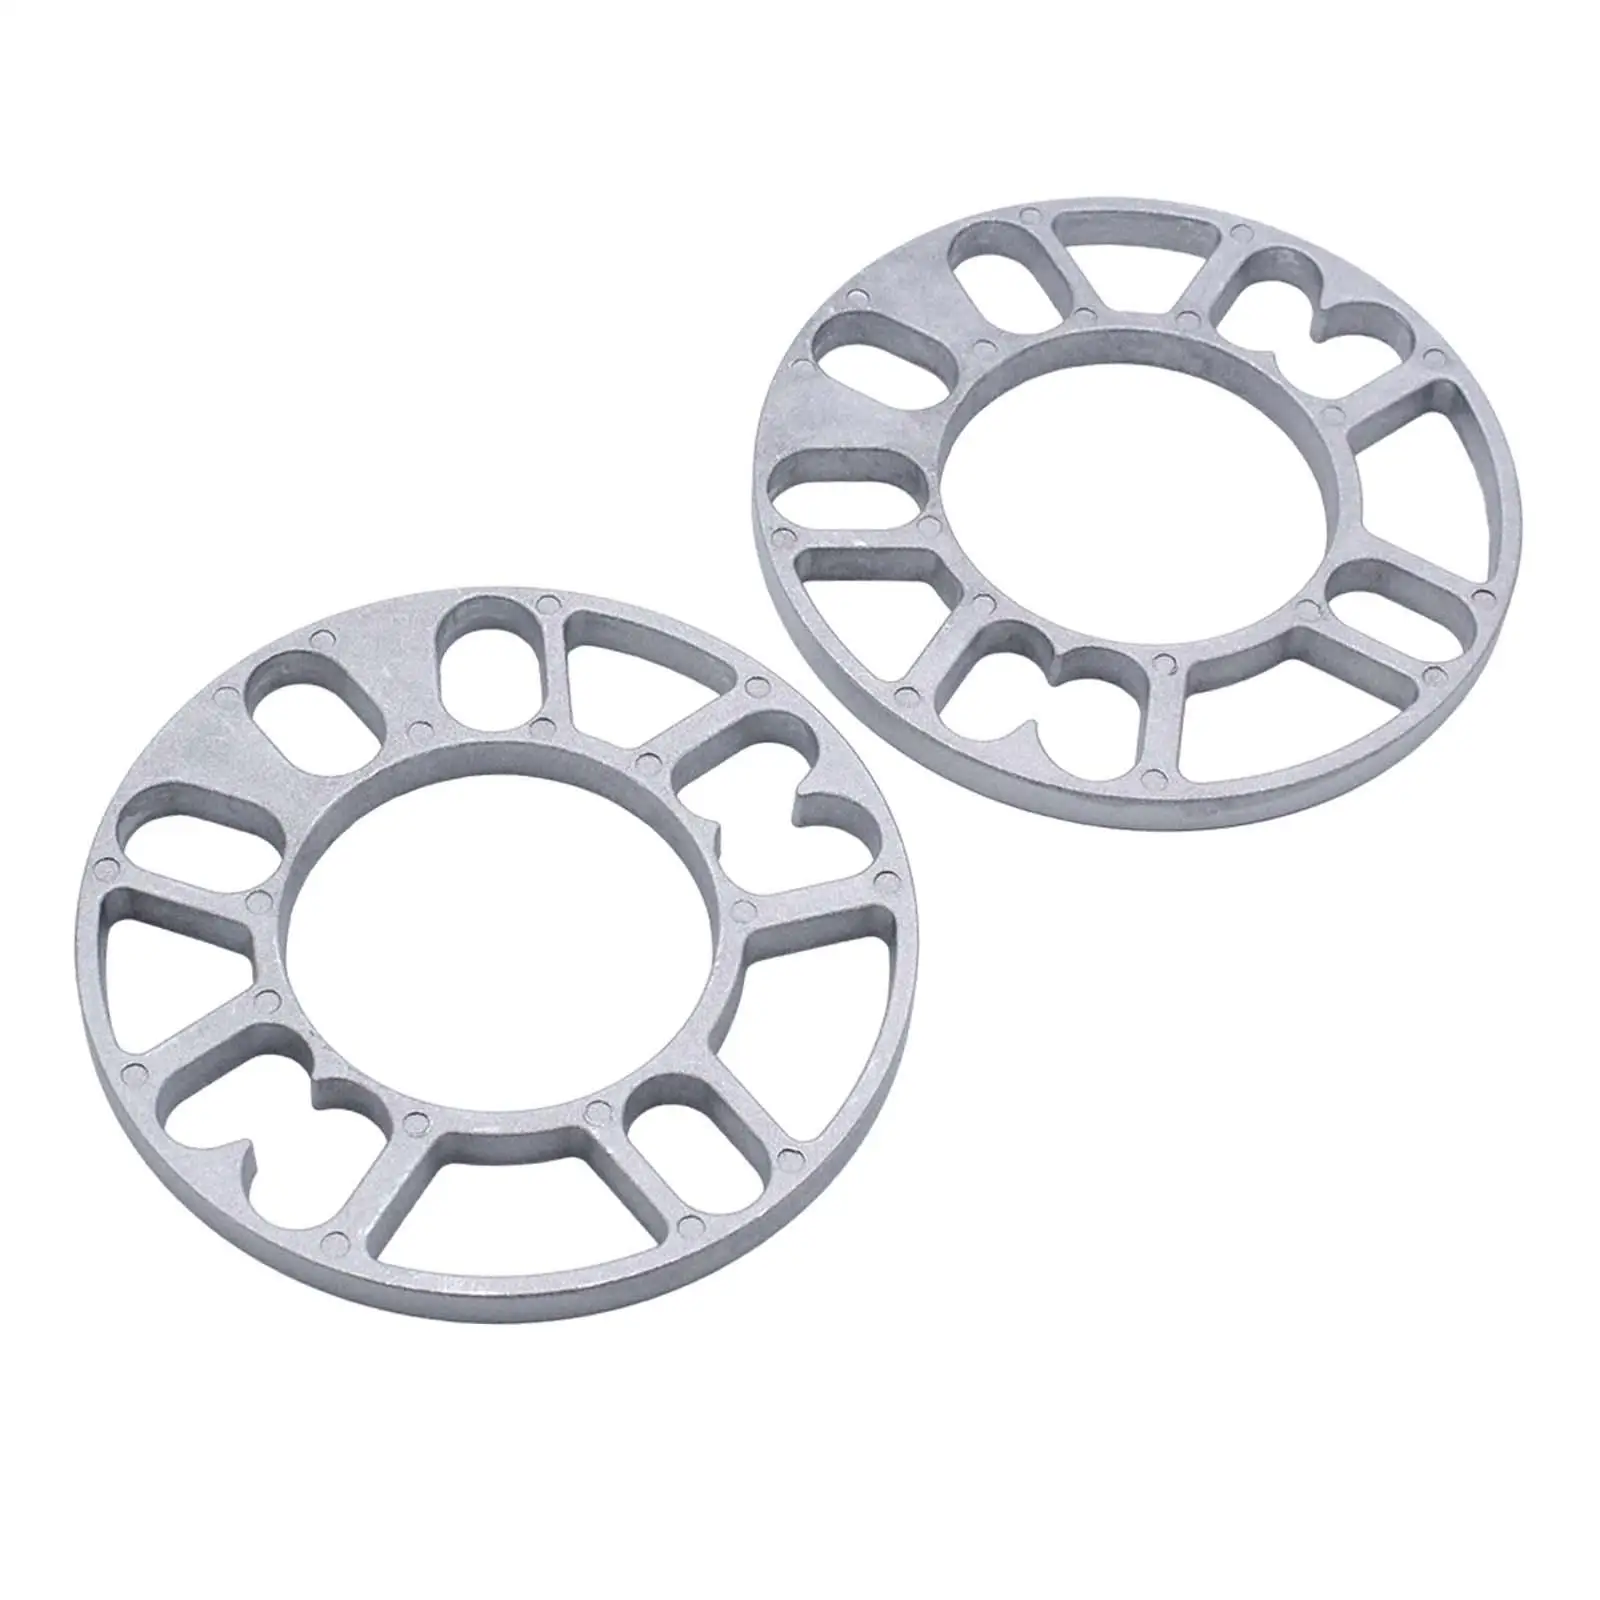 2 Pieces Hub Centric Wheel Spacers Aluminum Alloy Accessories Universal for 10mm Stud Wheels Wear Resistant Easily Install